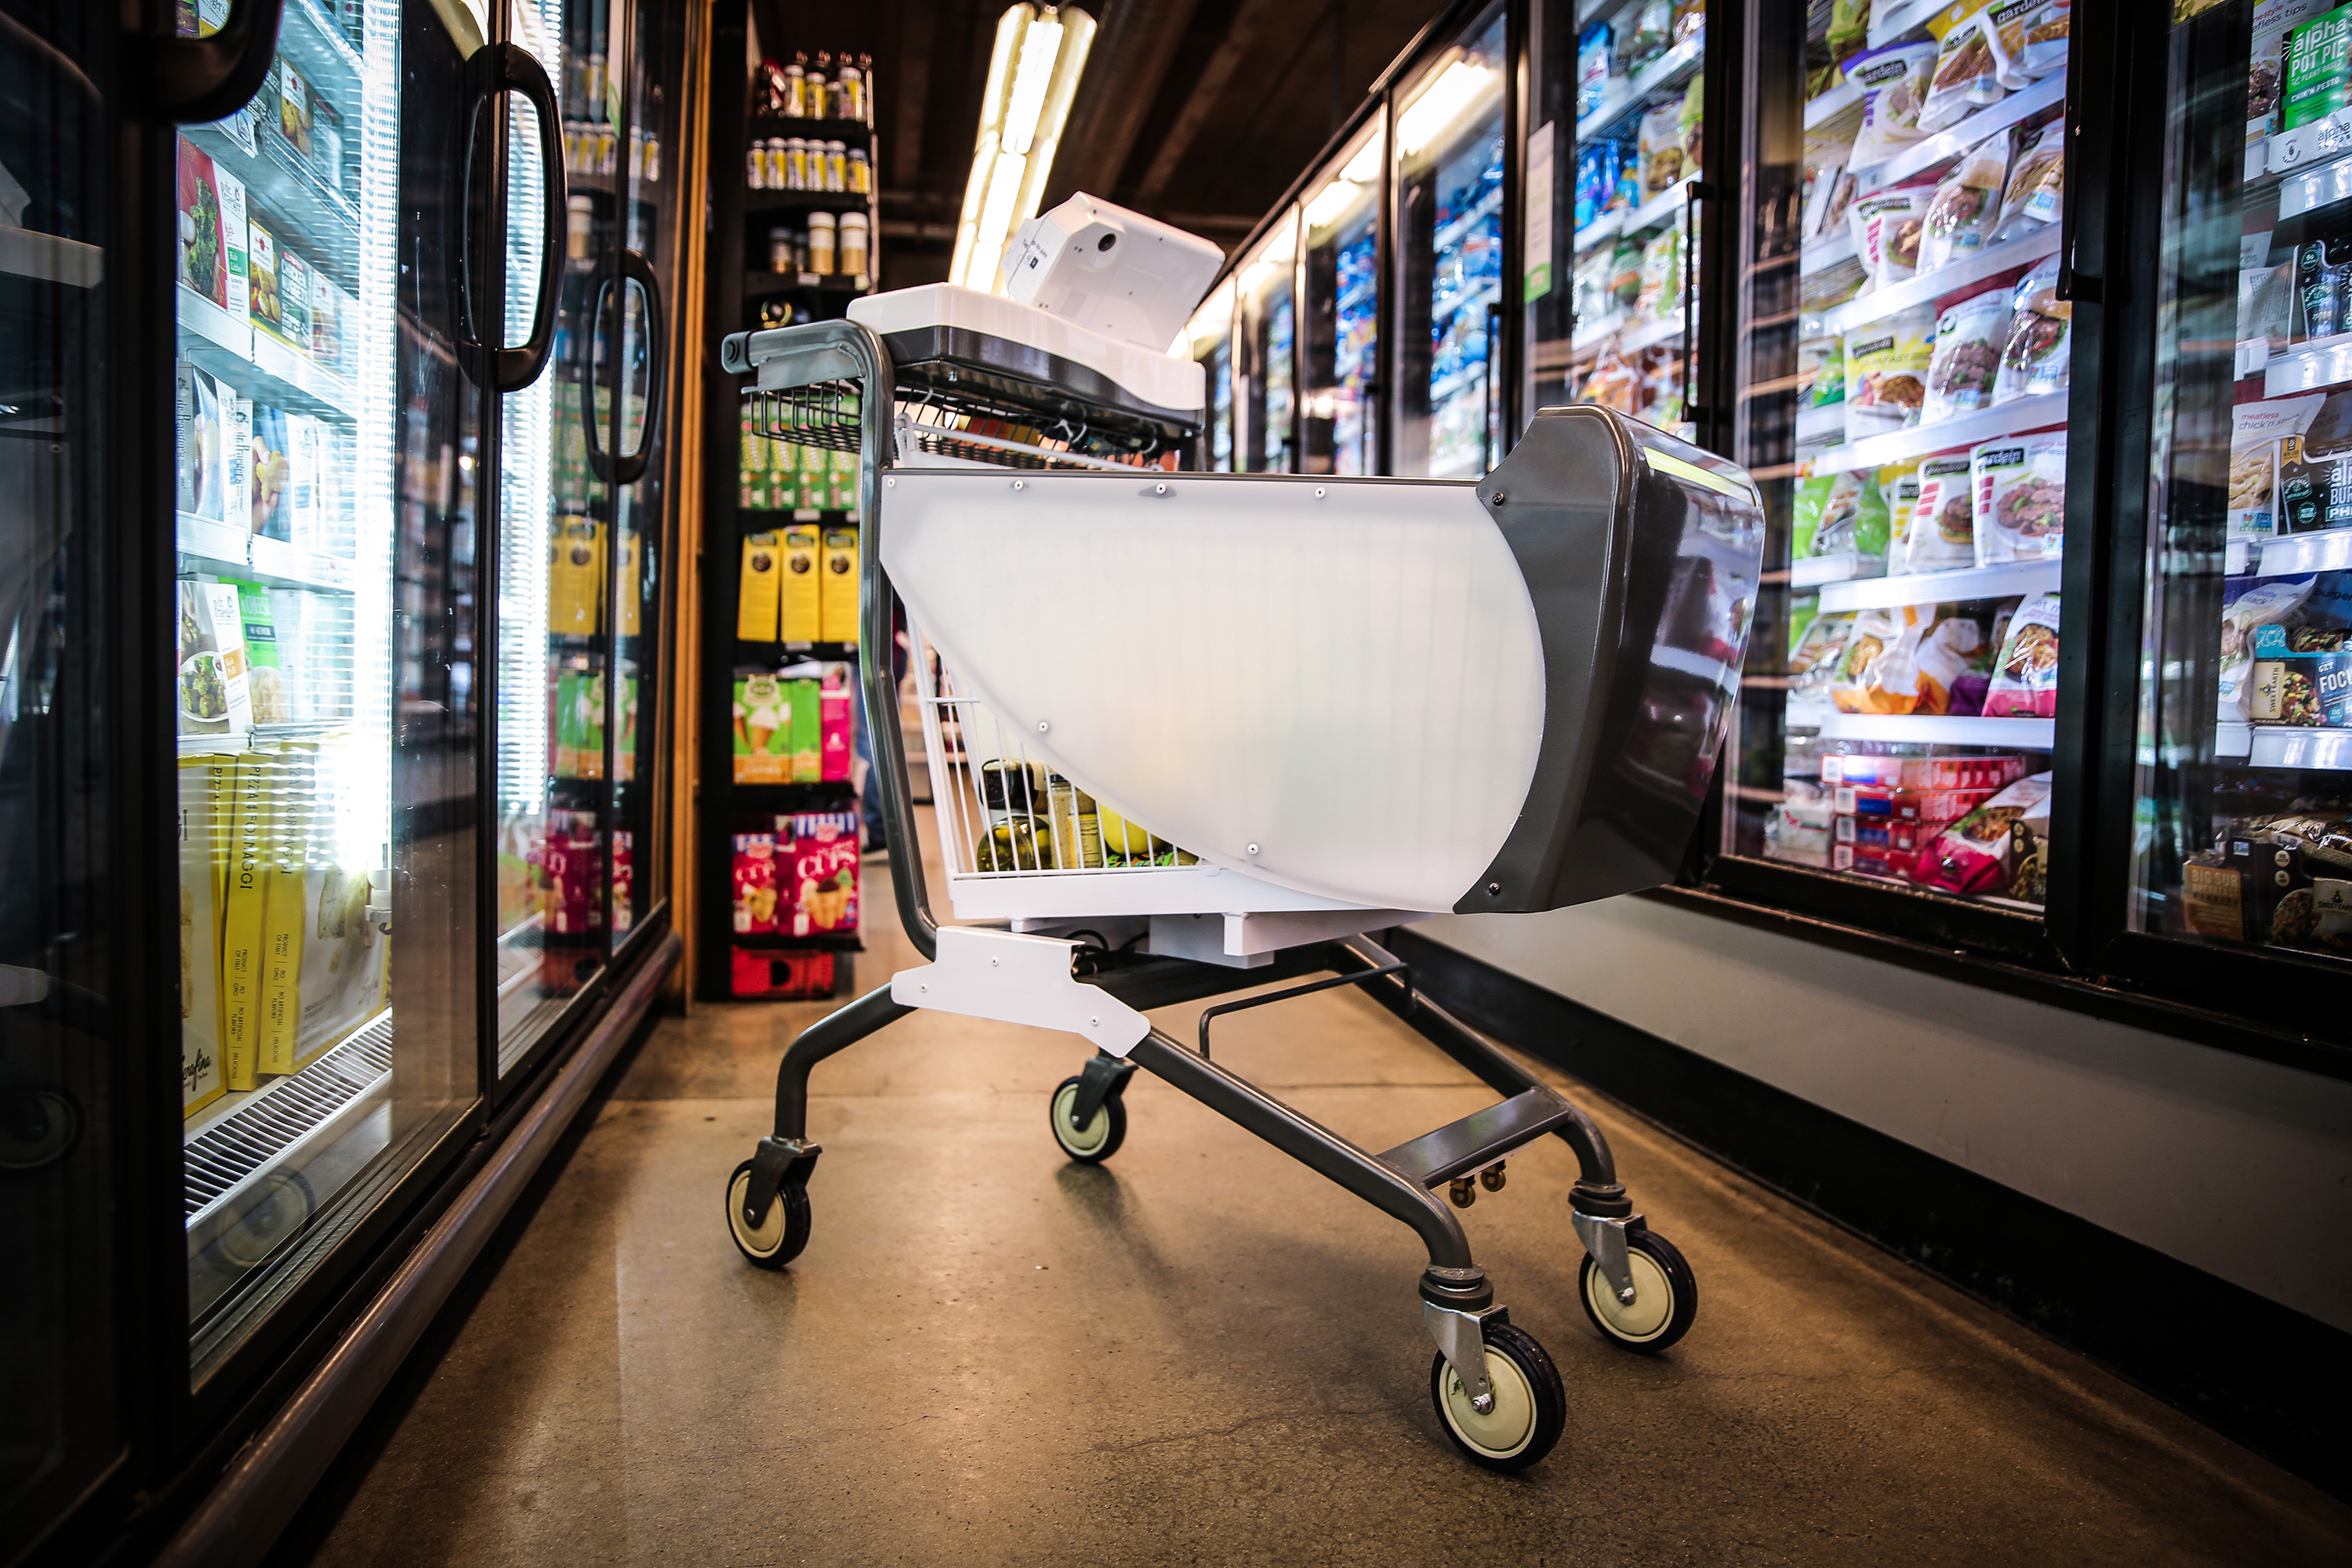 This AI shopping cart aims to be Amazon Go on wheels